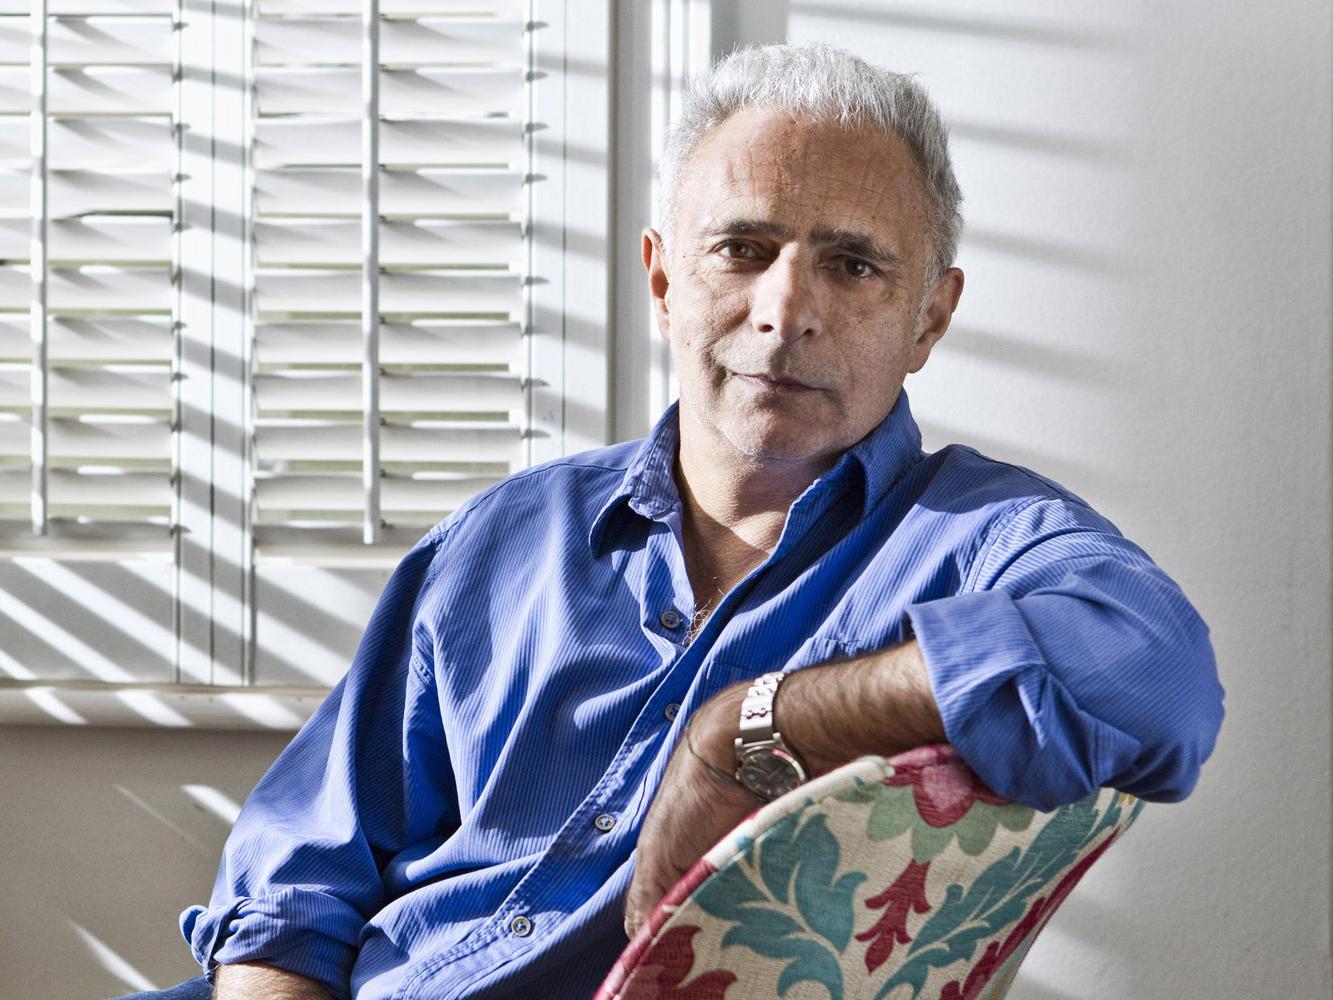 Hanif Kureishi Author, screenwriter. Most recently LE-WEEKEND. Winner of a Whitbread and a PEN/Pinter. New collection WHAT HAPPENED? Fellow of King's College London